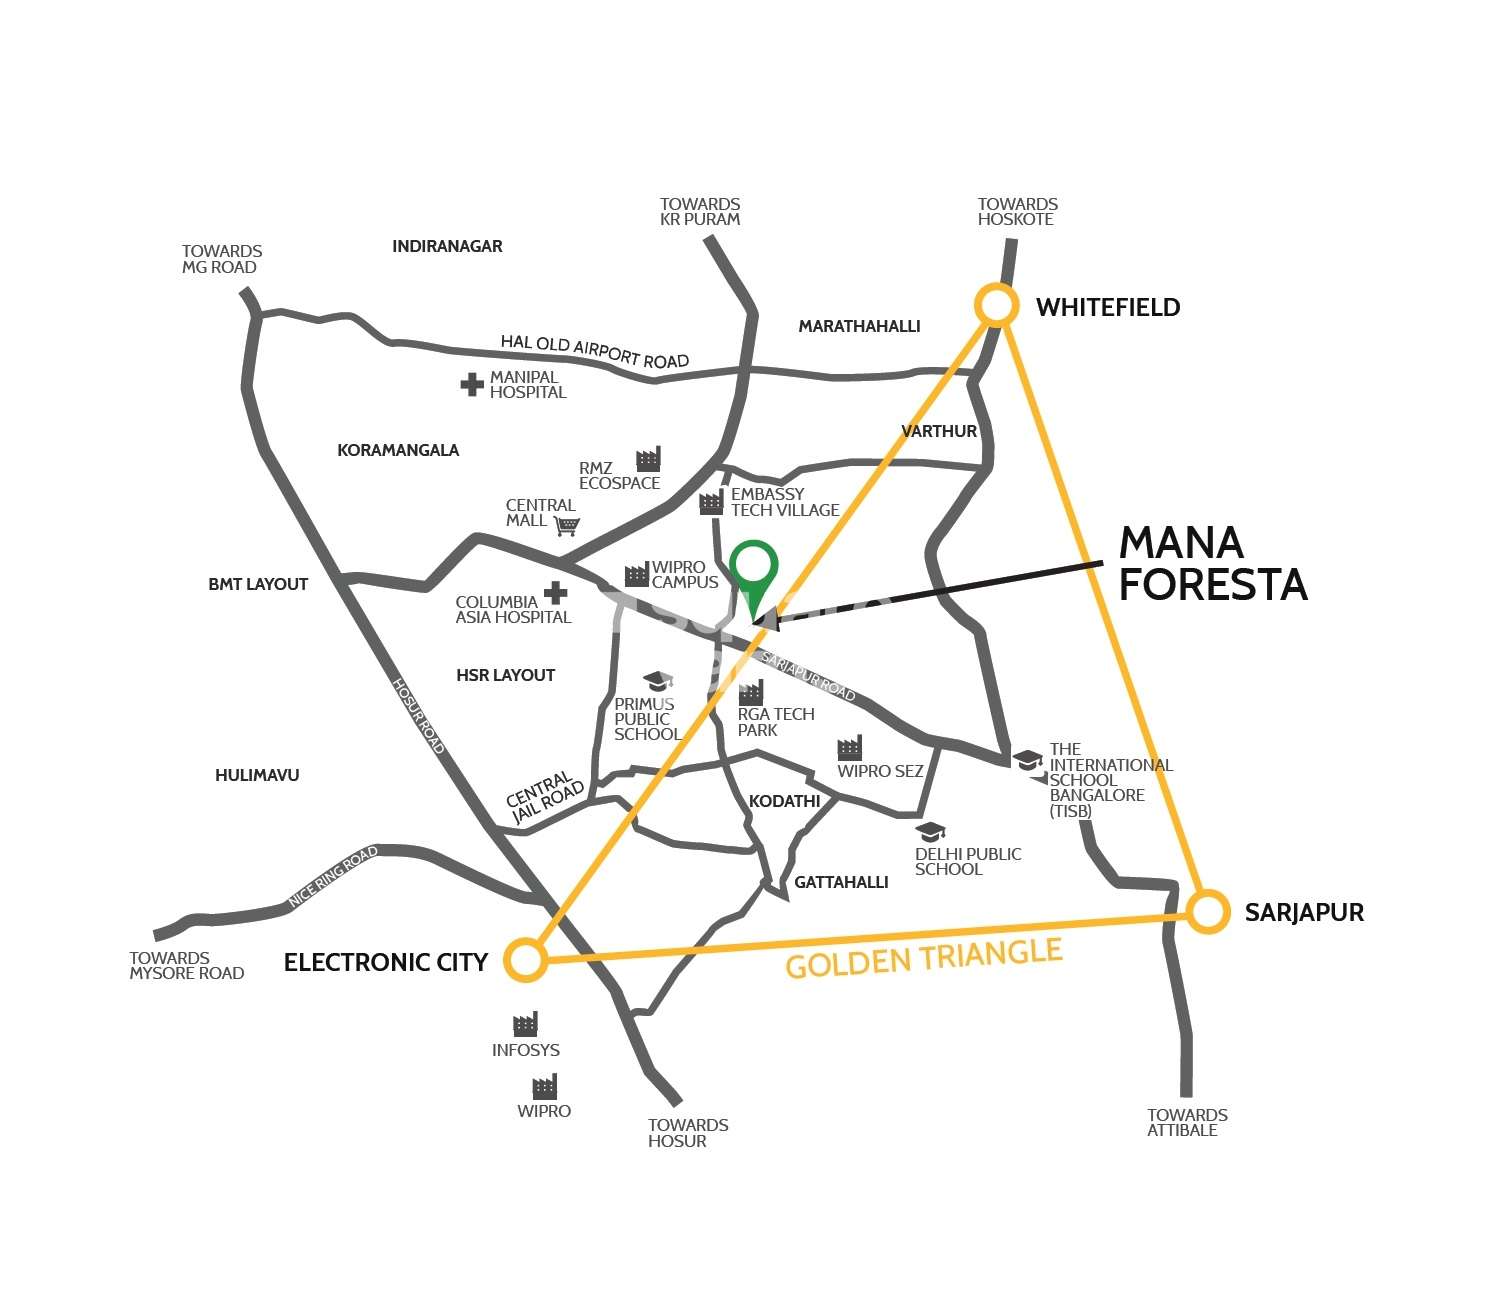 mana foresta project location image1 7114